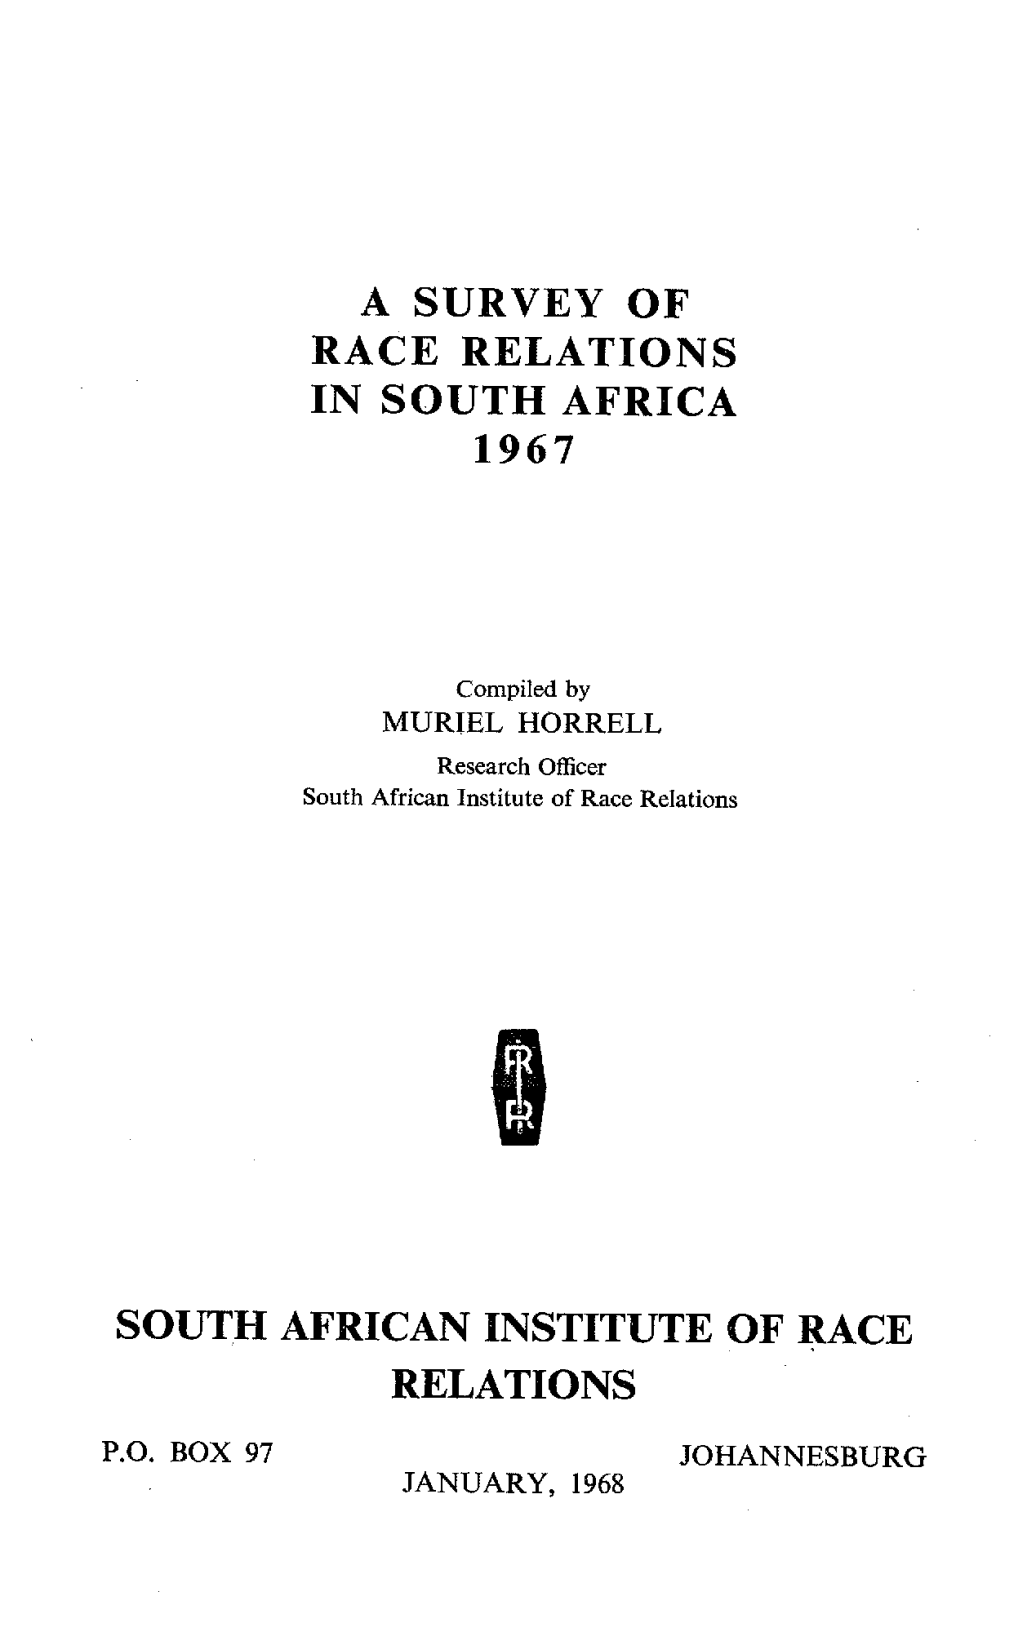 A Survey of Race Relations in South Africa 1967